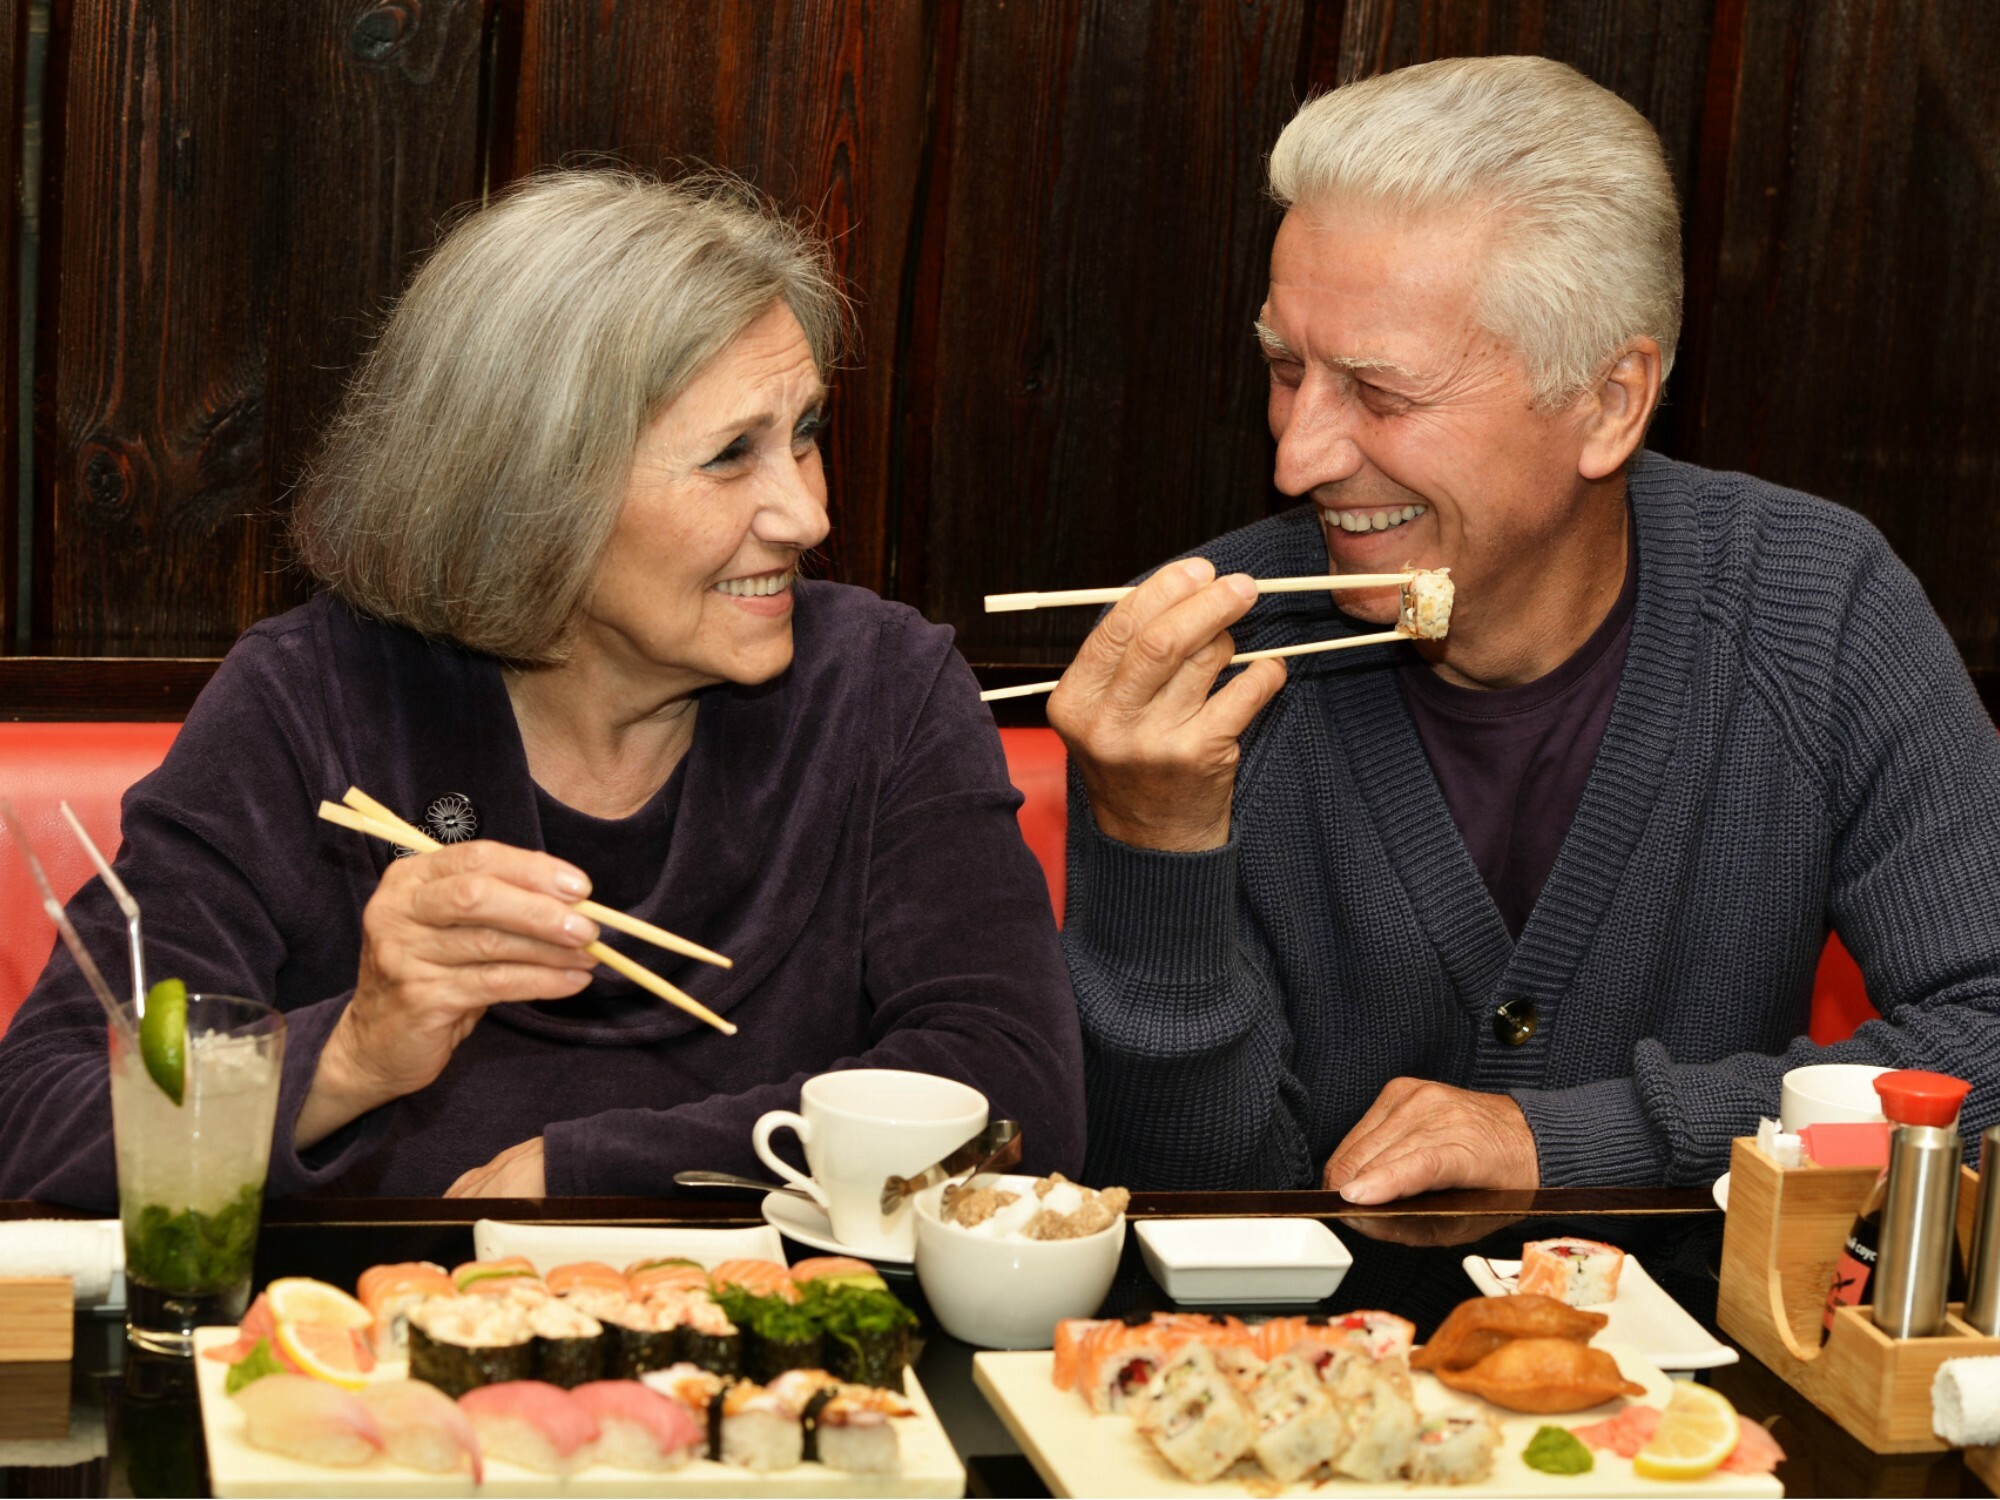 Older couple on a date eating sushi